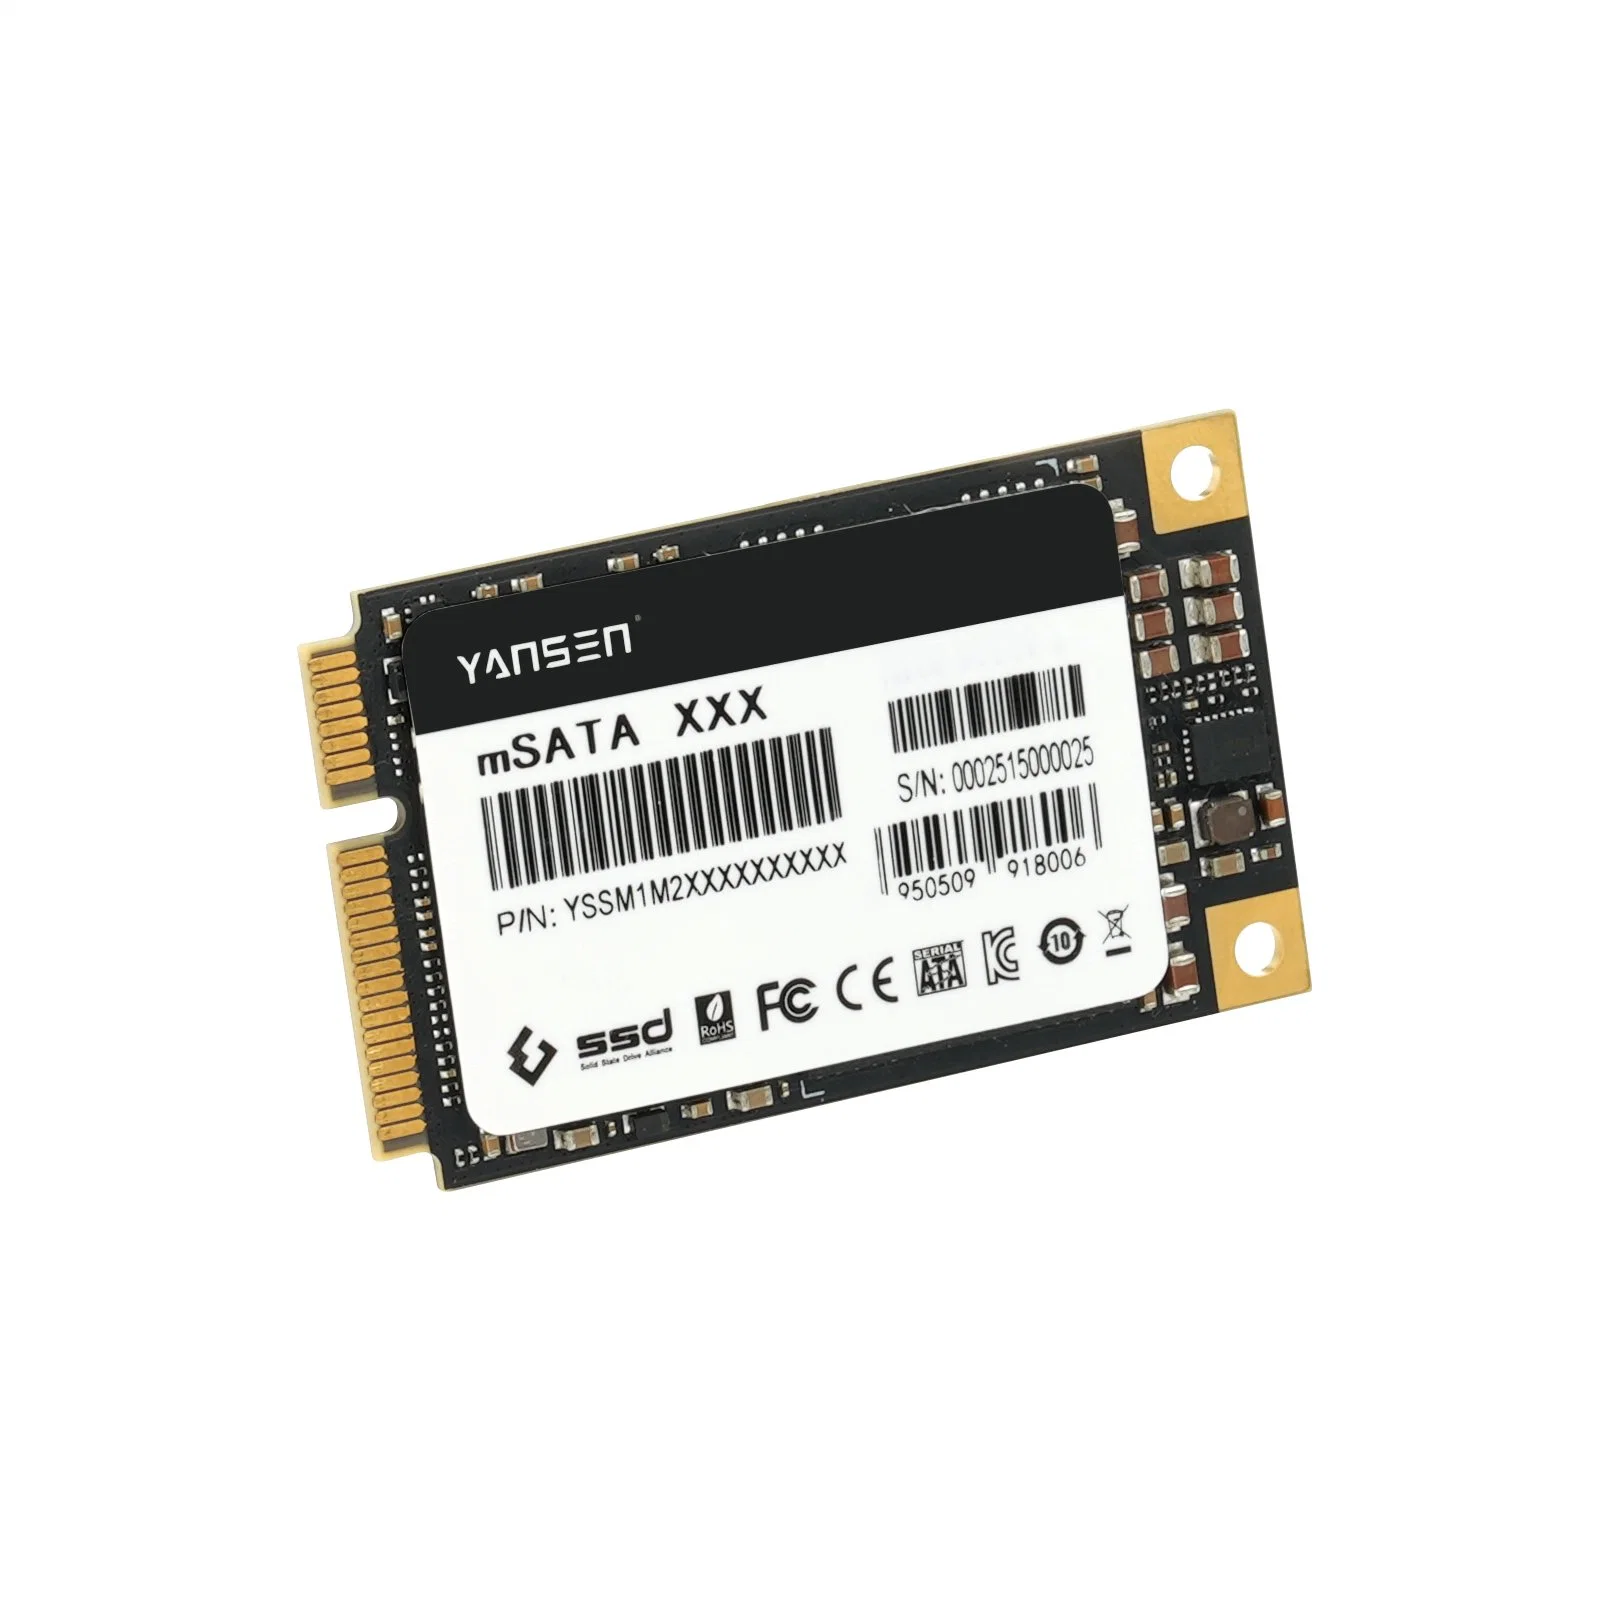 Yansen Msata SSD MLC 1tb SSD Solid State Disk with DRAM for Thin Clients and Vending Machine